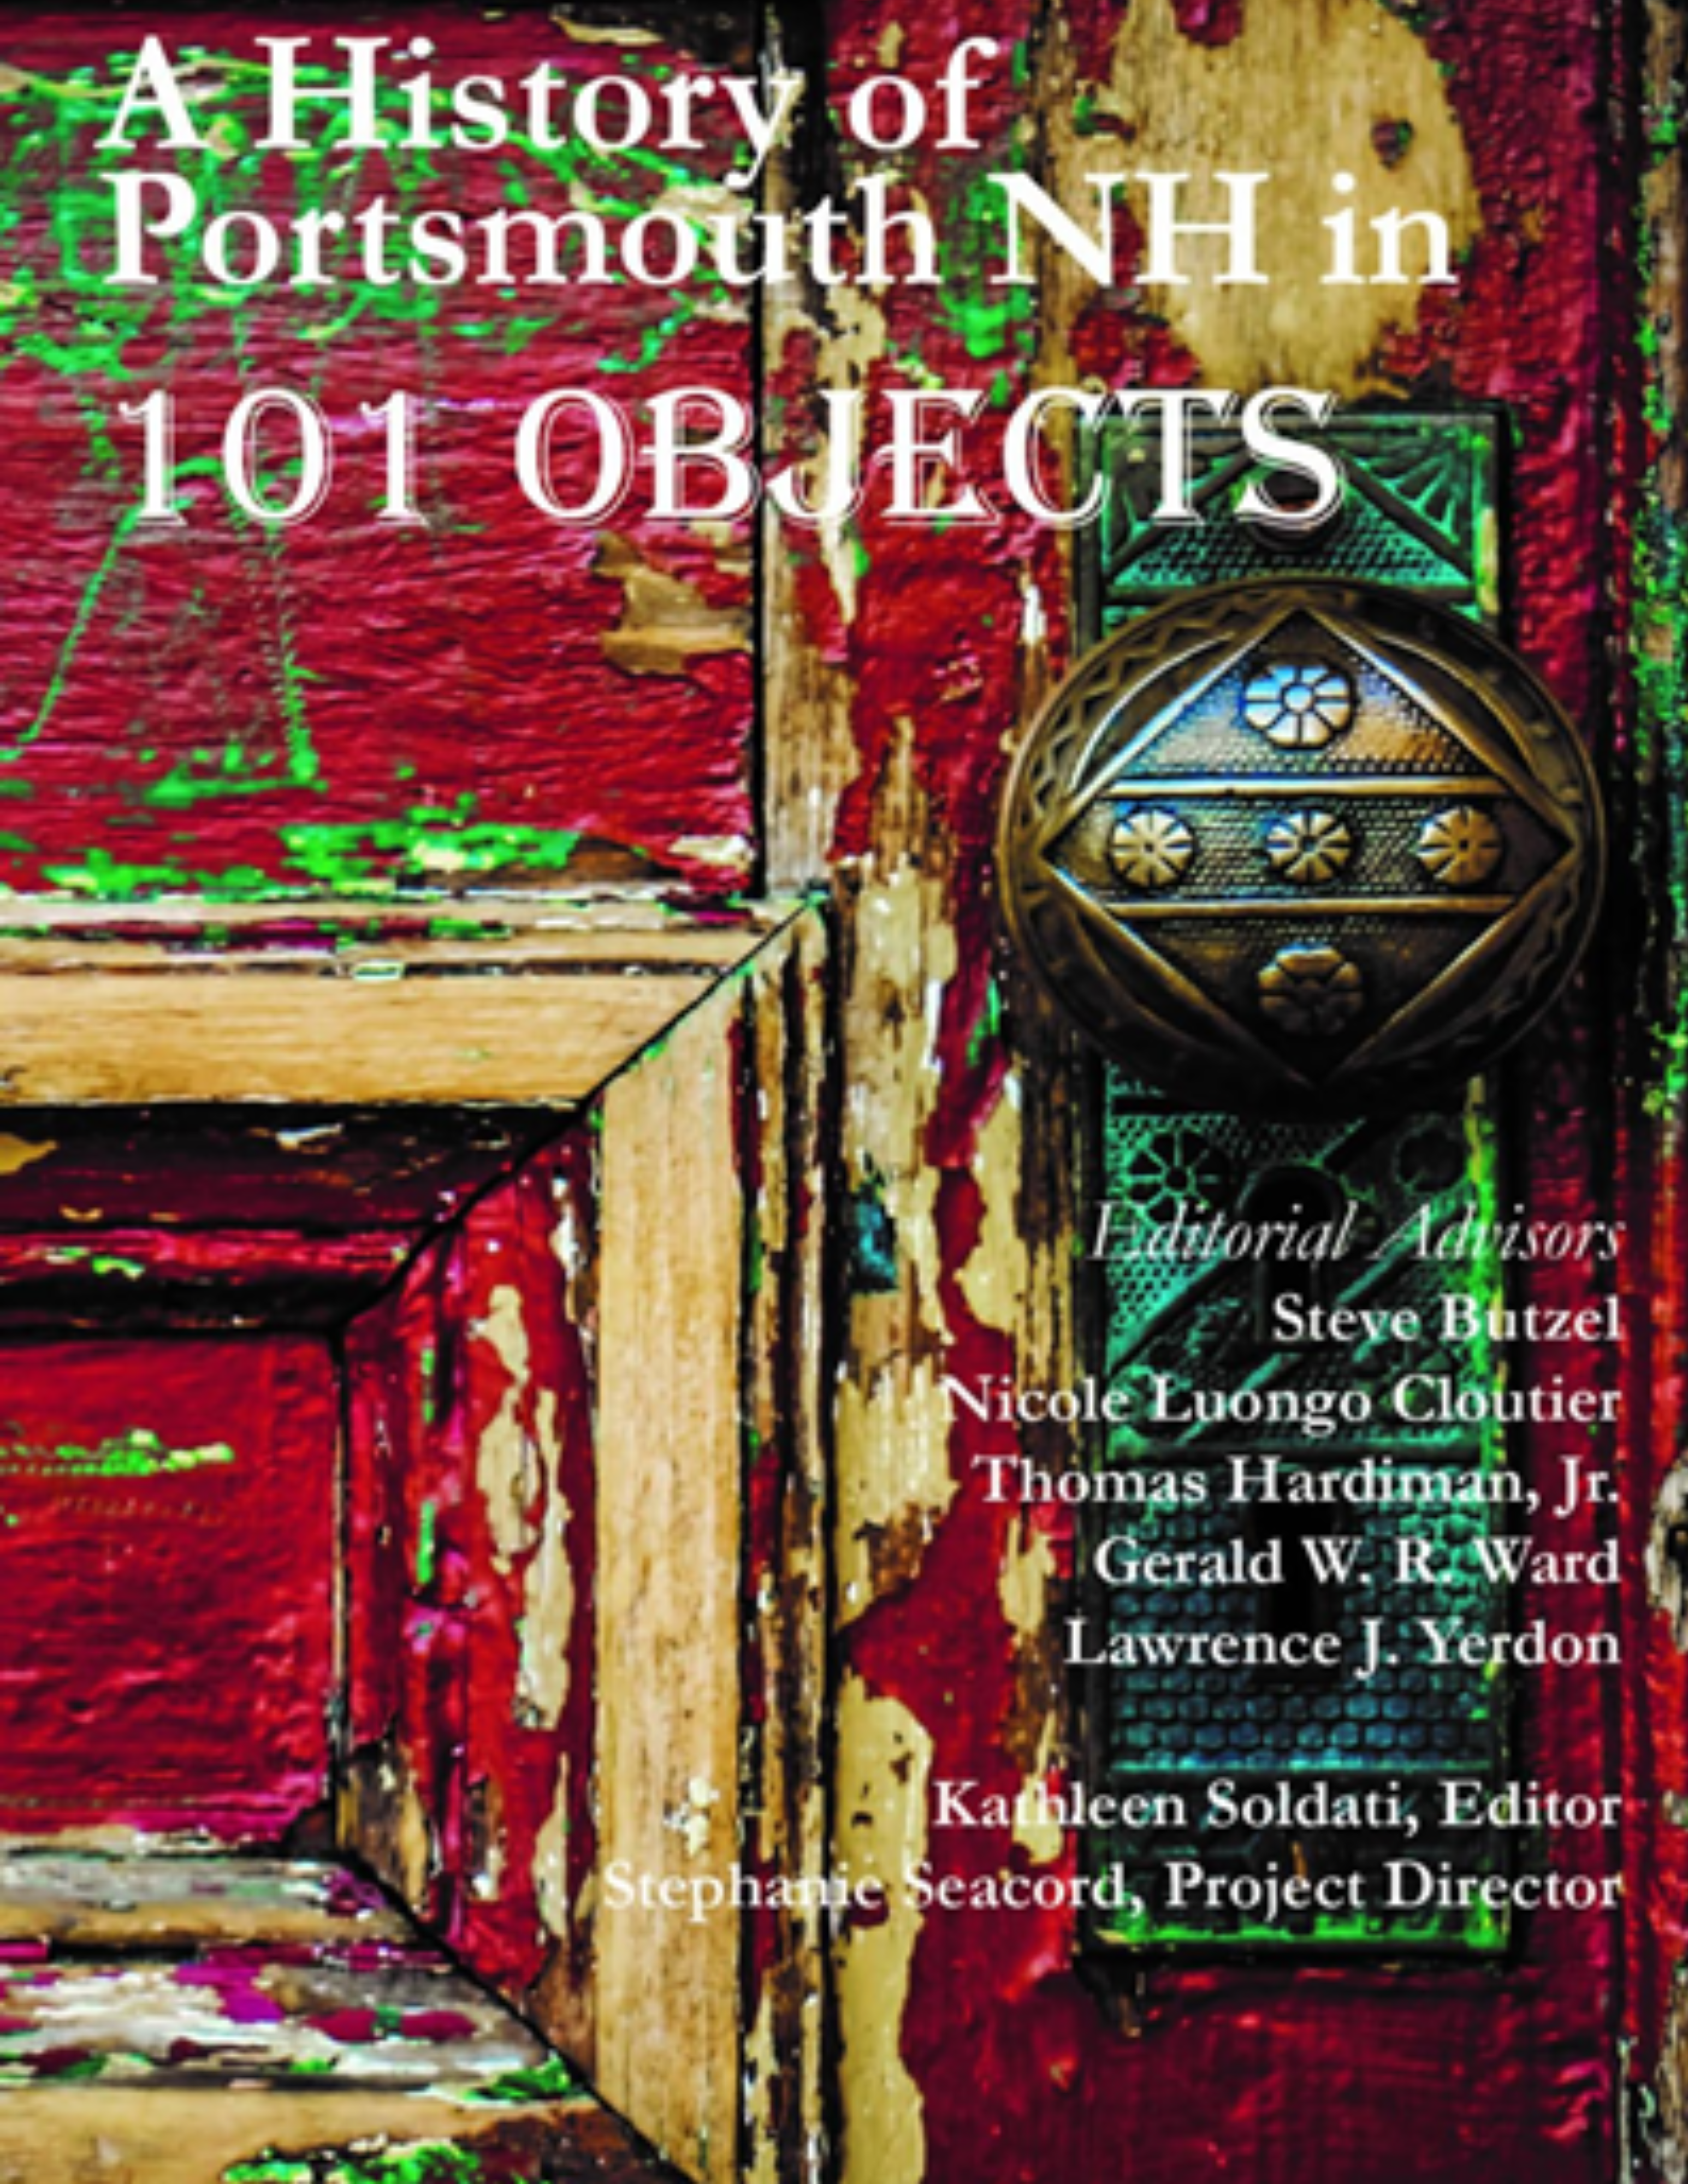 A History of Portsmouth NH in 101 Objects Editorial Advisors Steve Butzel Nicole Luongo Cloutier Thomas Hardiman, Jr. Gerald W. R. Ward Lawrence J. Yerdon Kathleen Soldati Editor Stephanie Secord Project Director Old red and green door decorative brass doorknob